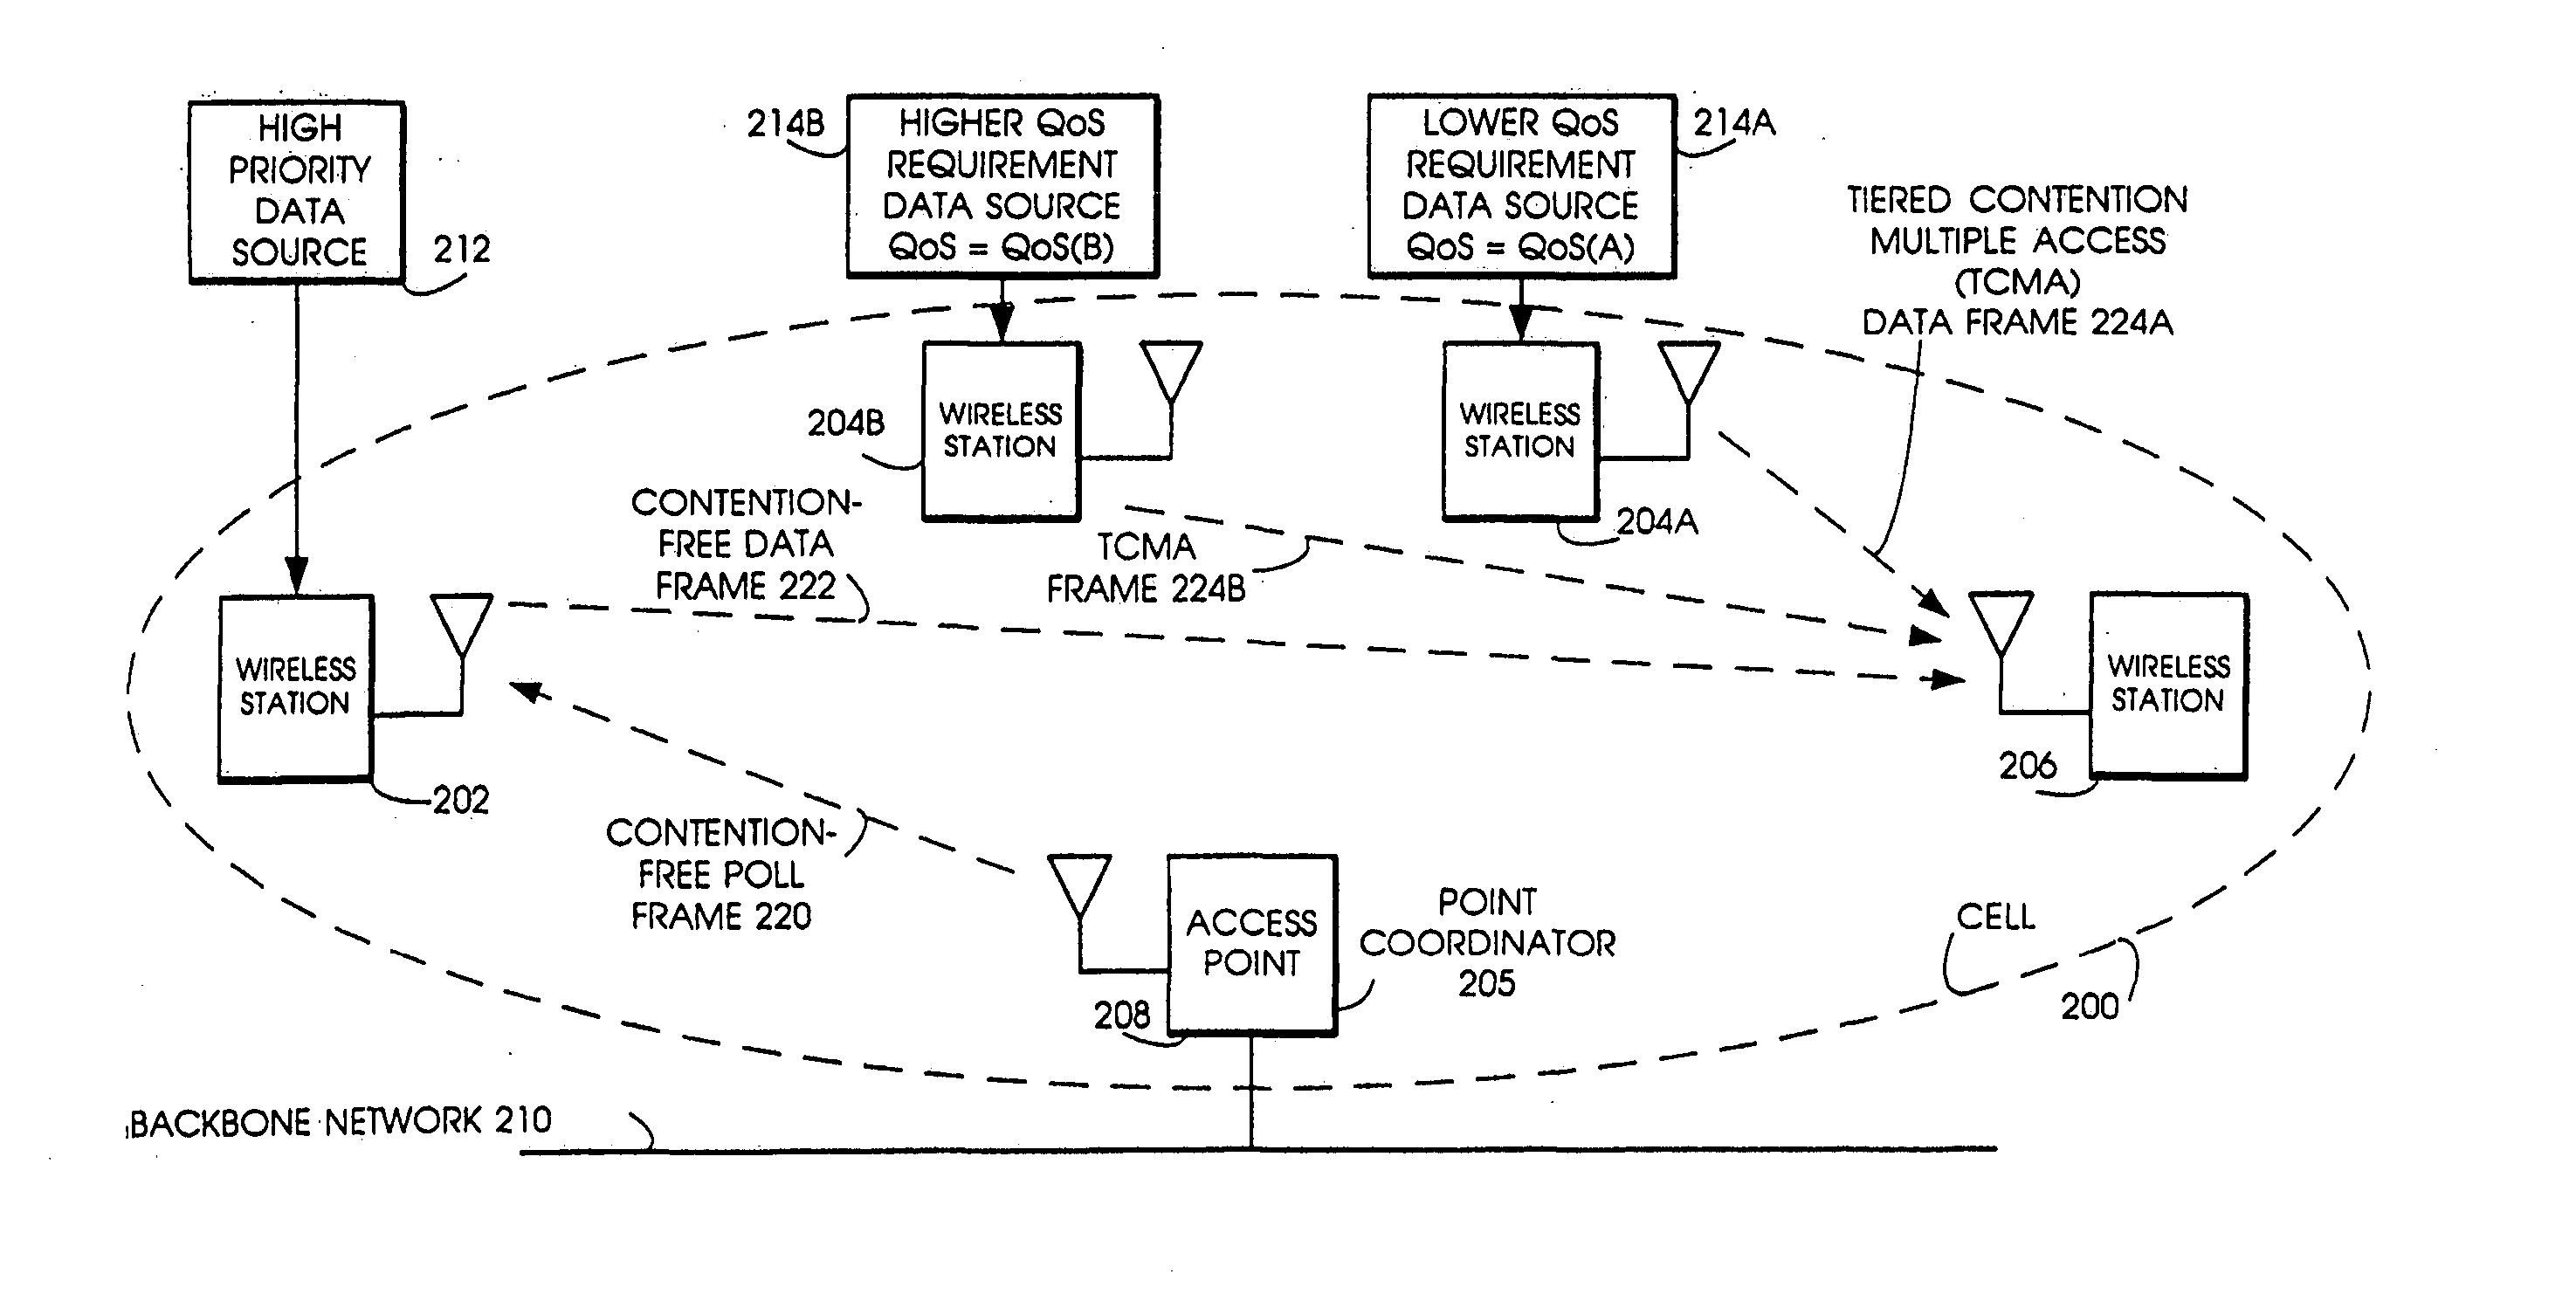 Tiered contention multiple access(TCMA): a method for priority-based shared channel access